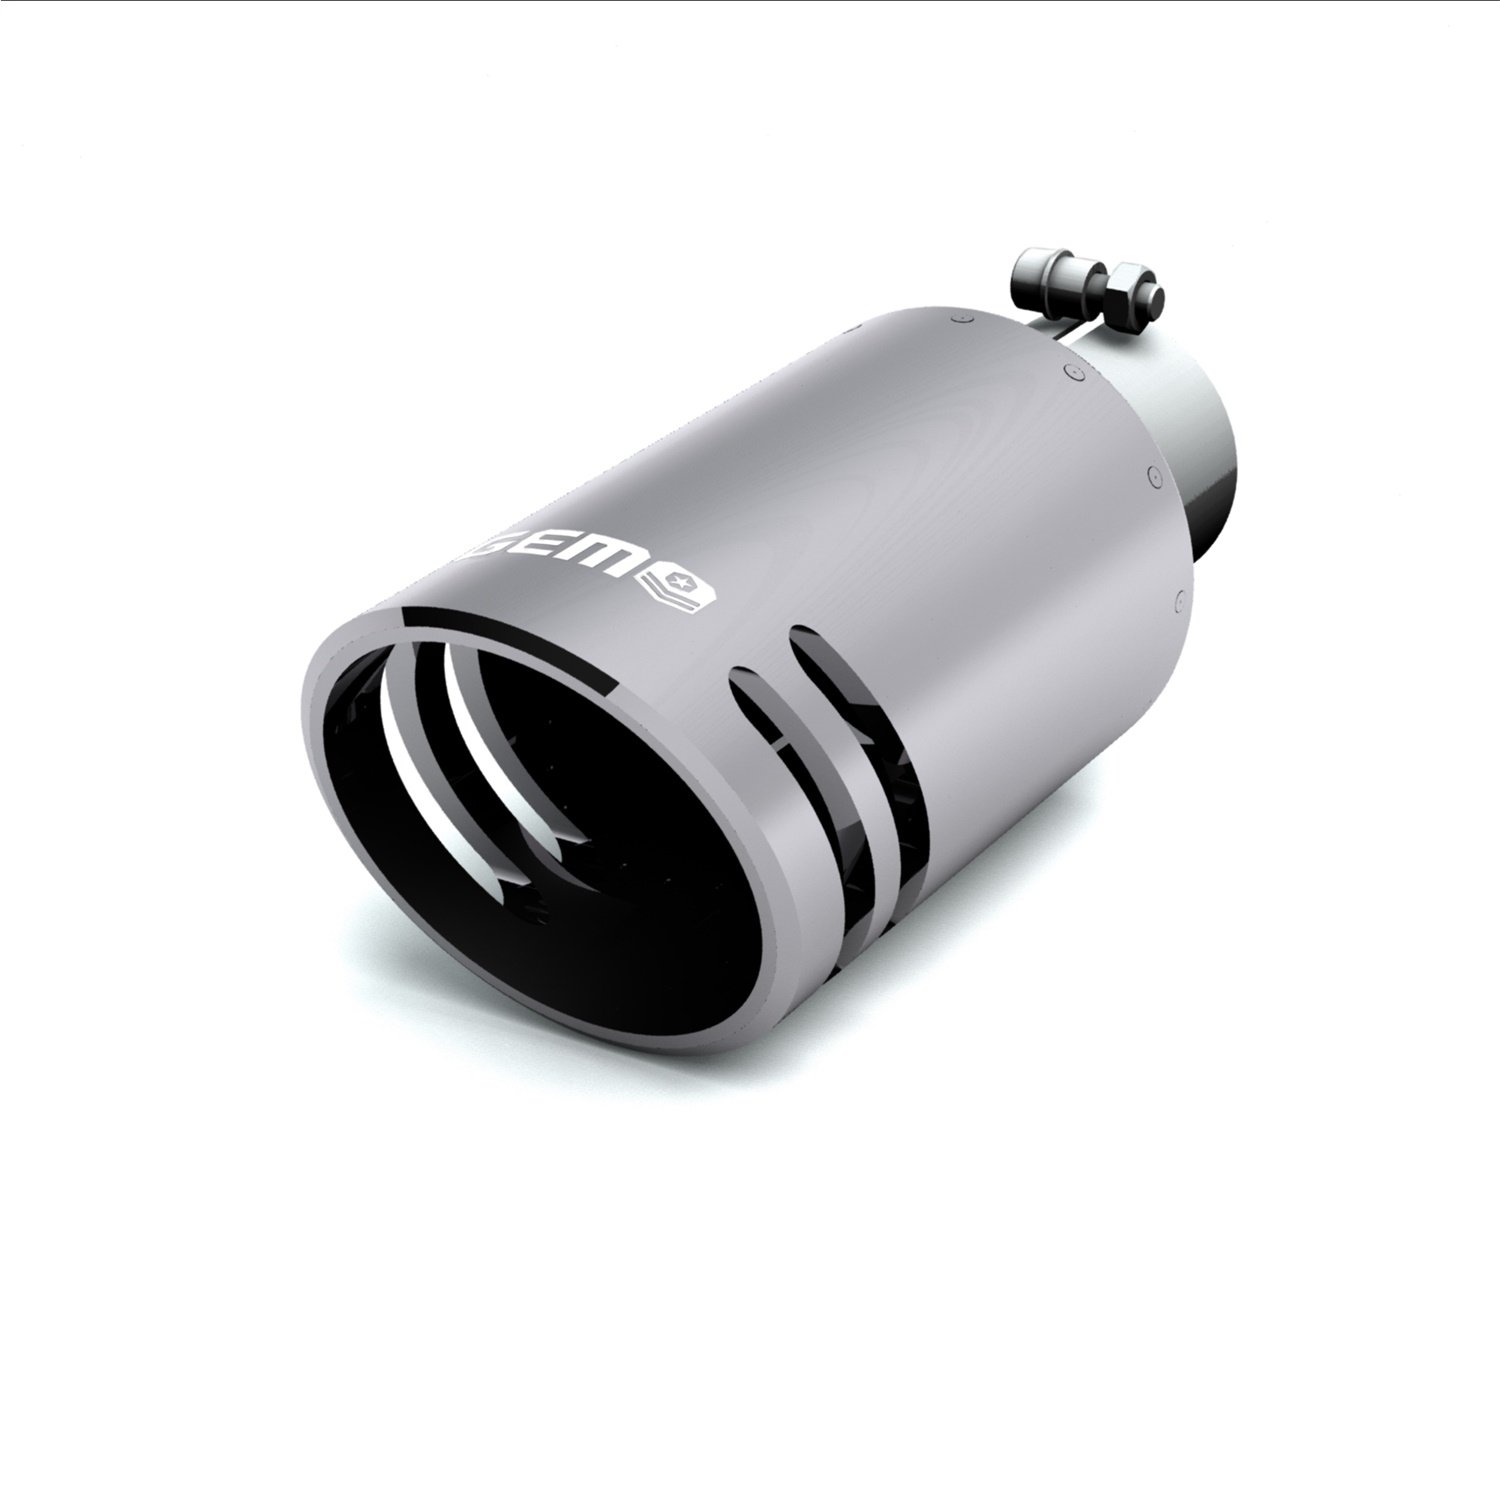 GEM Billet Exhaust Tip, 2.5 in. Inlet/5 in. Outlet x 12 in. Length, Aluminum/304 Stainless Steel, SILENCER Cut [Chrome Finish]